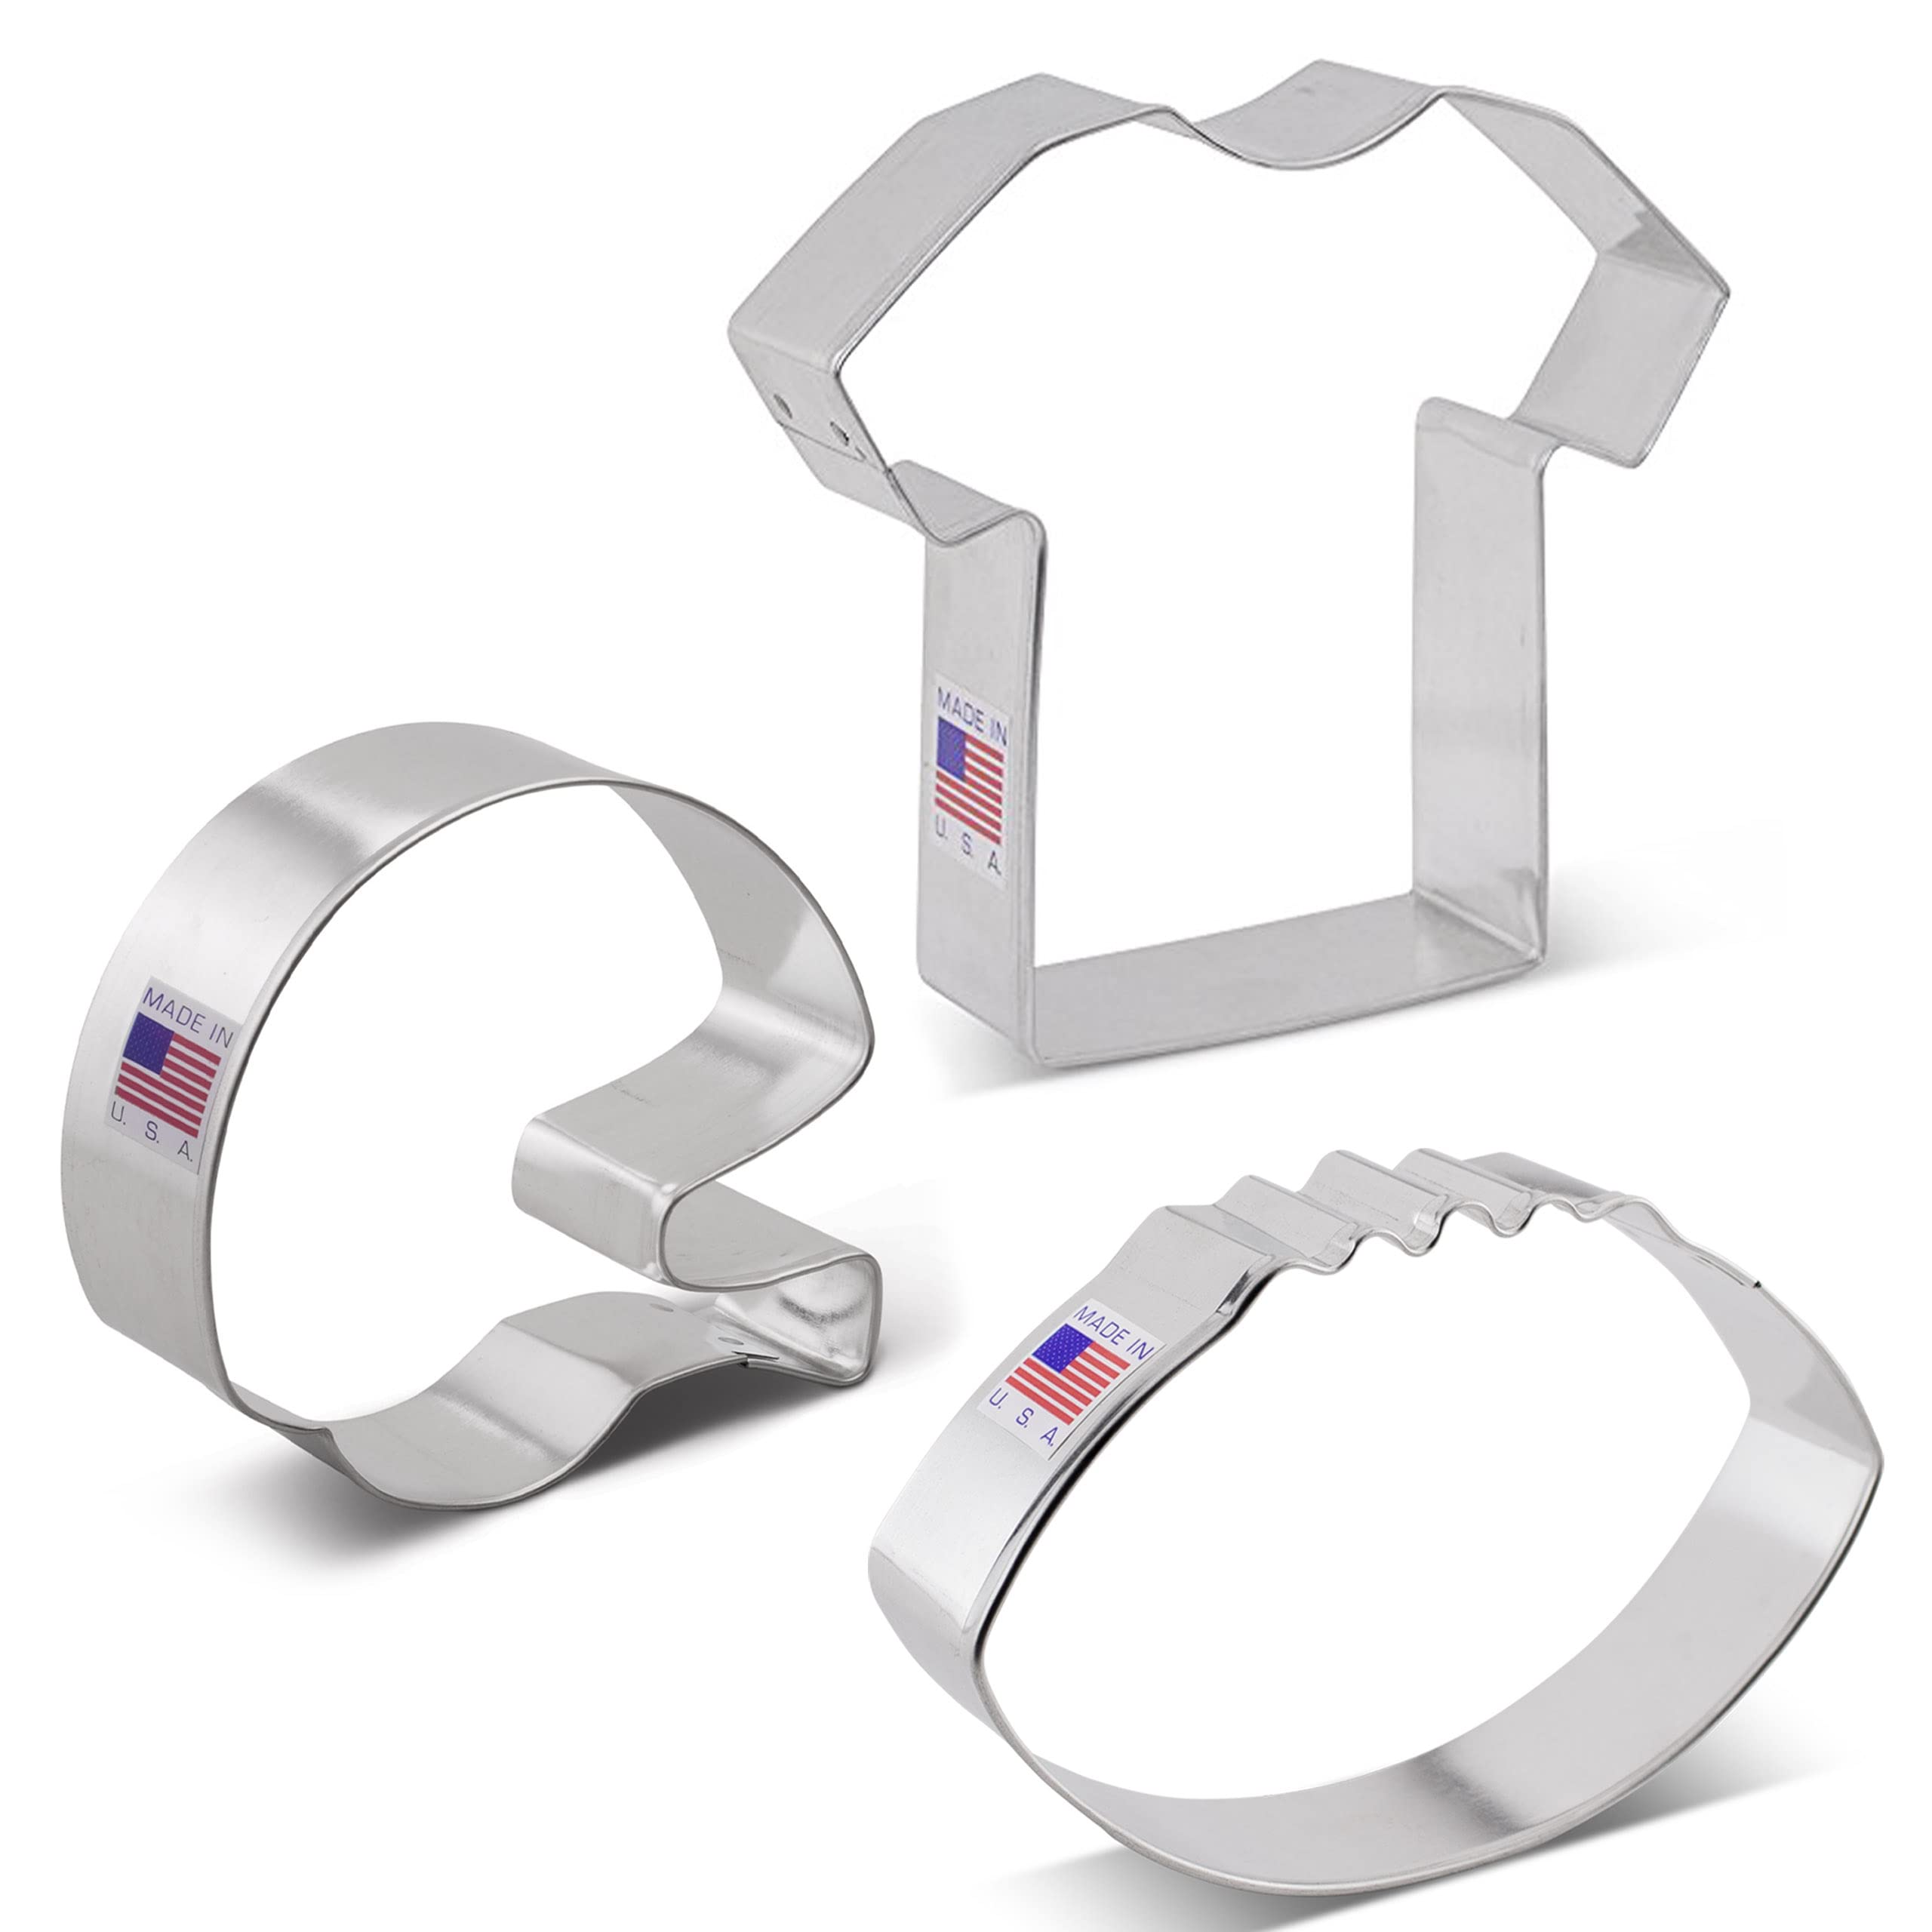 Football Cookie Cutters 3-Pc Set Made in the USA by Ann Clark, Football, Helmet, Jersey